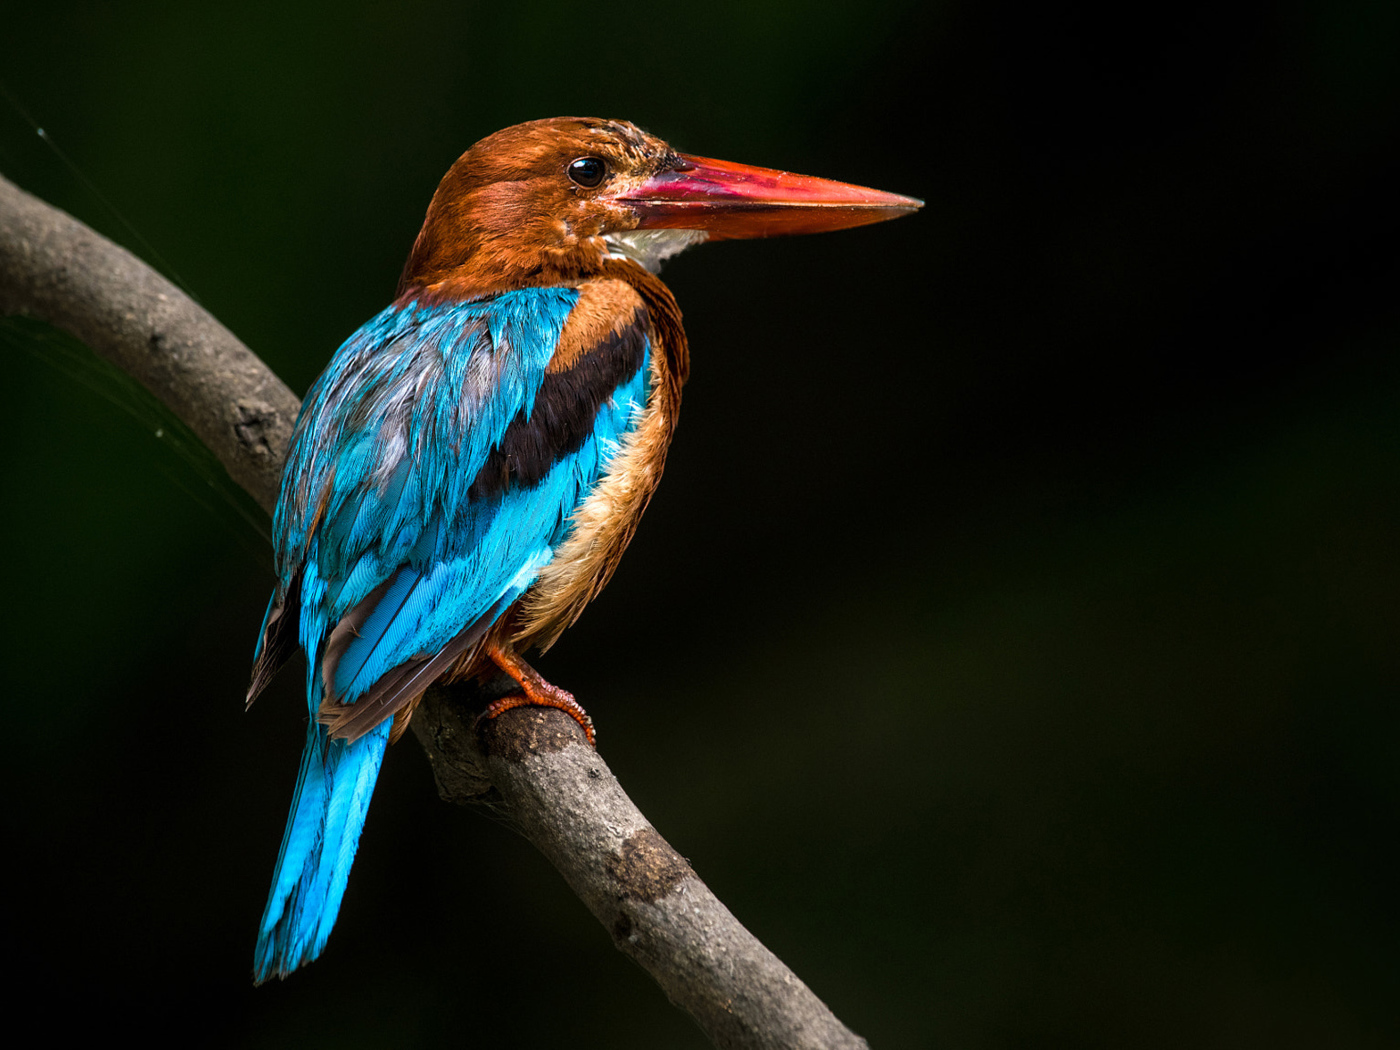 Multicolored bird kingfisher sitting on a tree branch